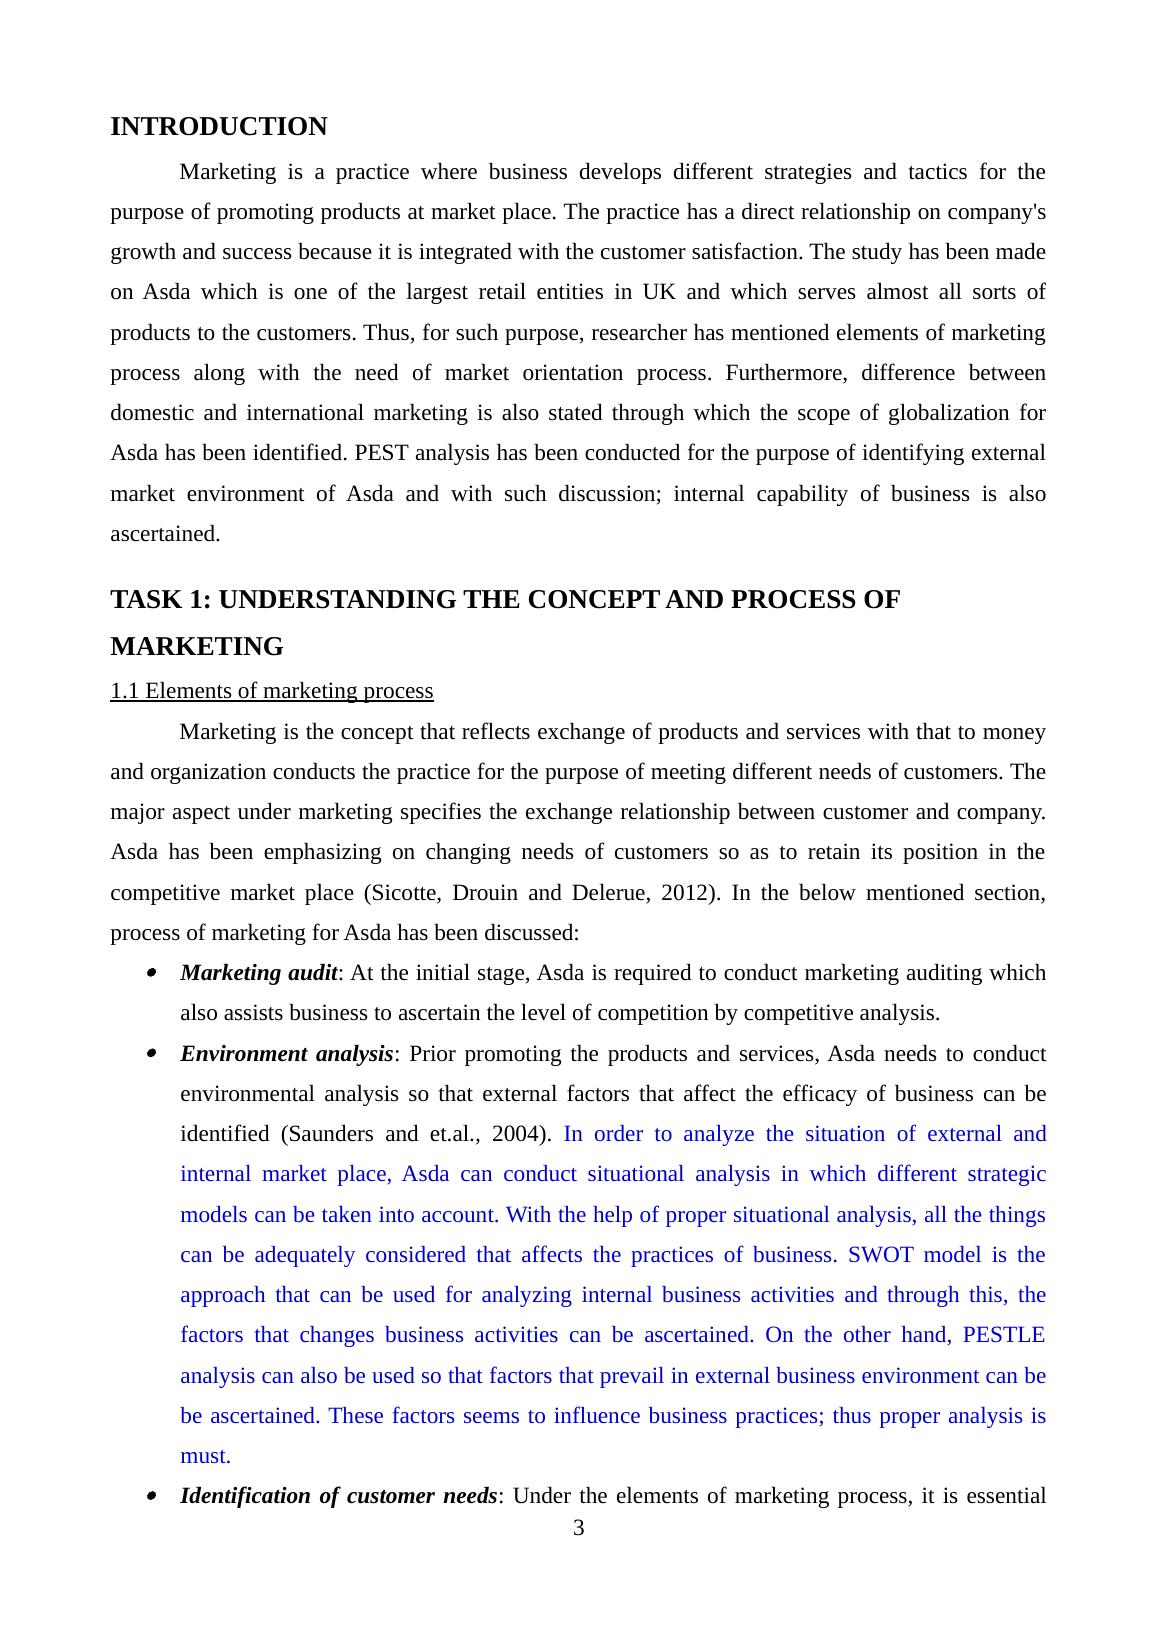 The Concepts and Process of Marketing - PDF_3